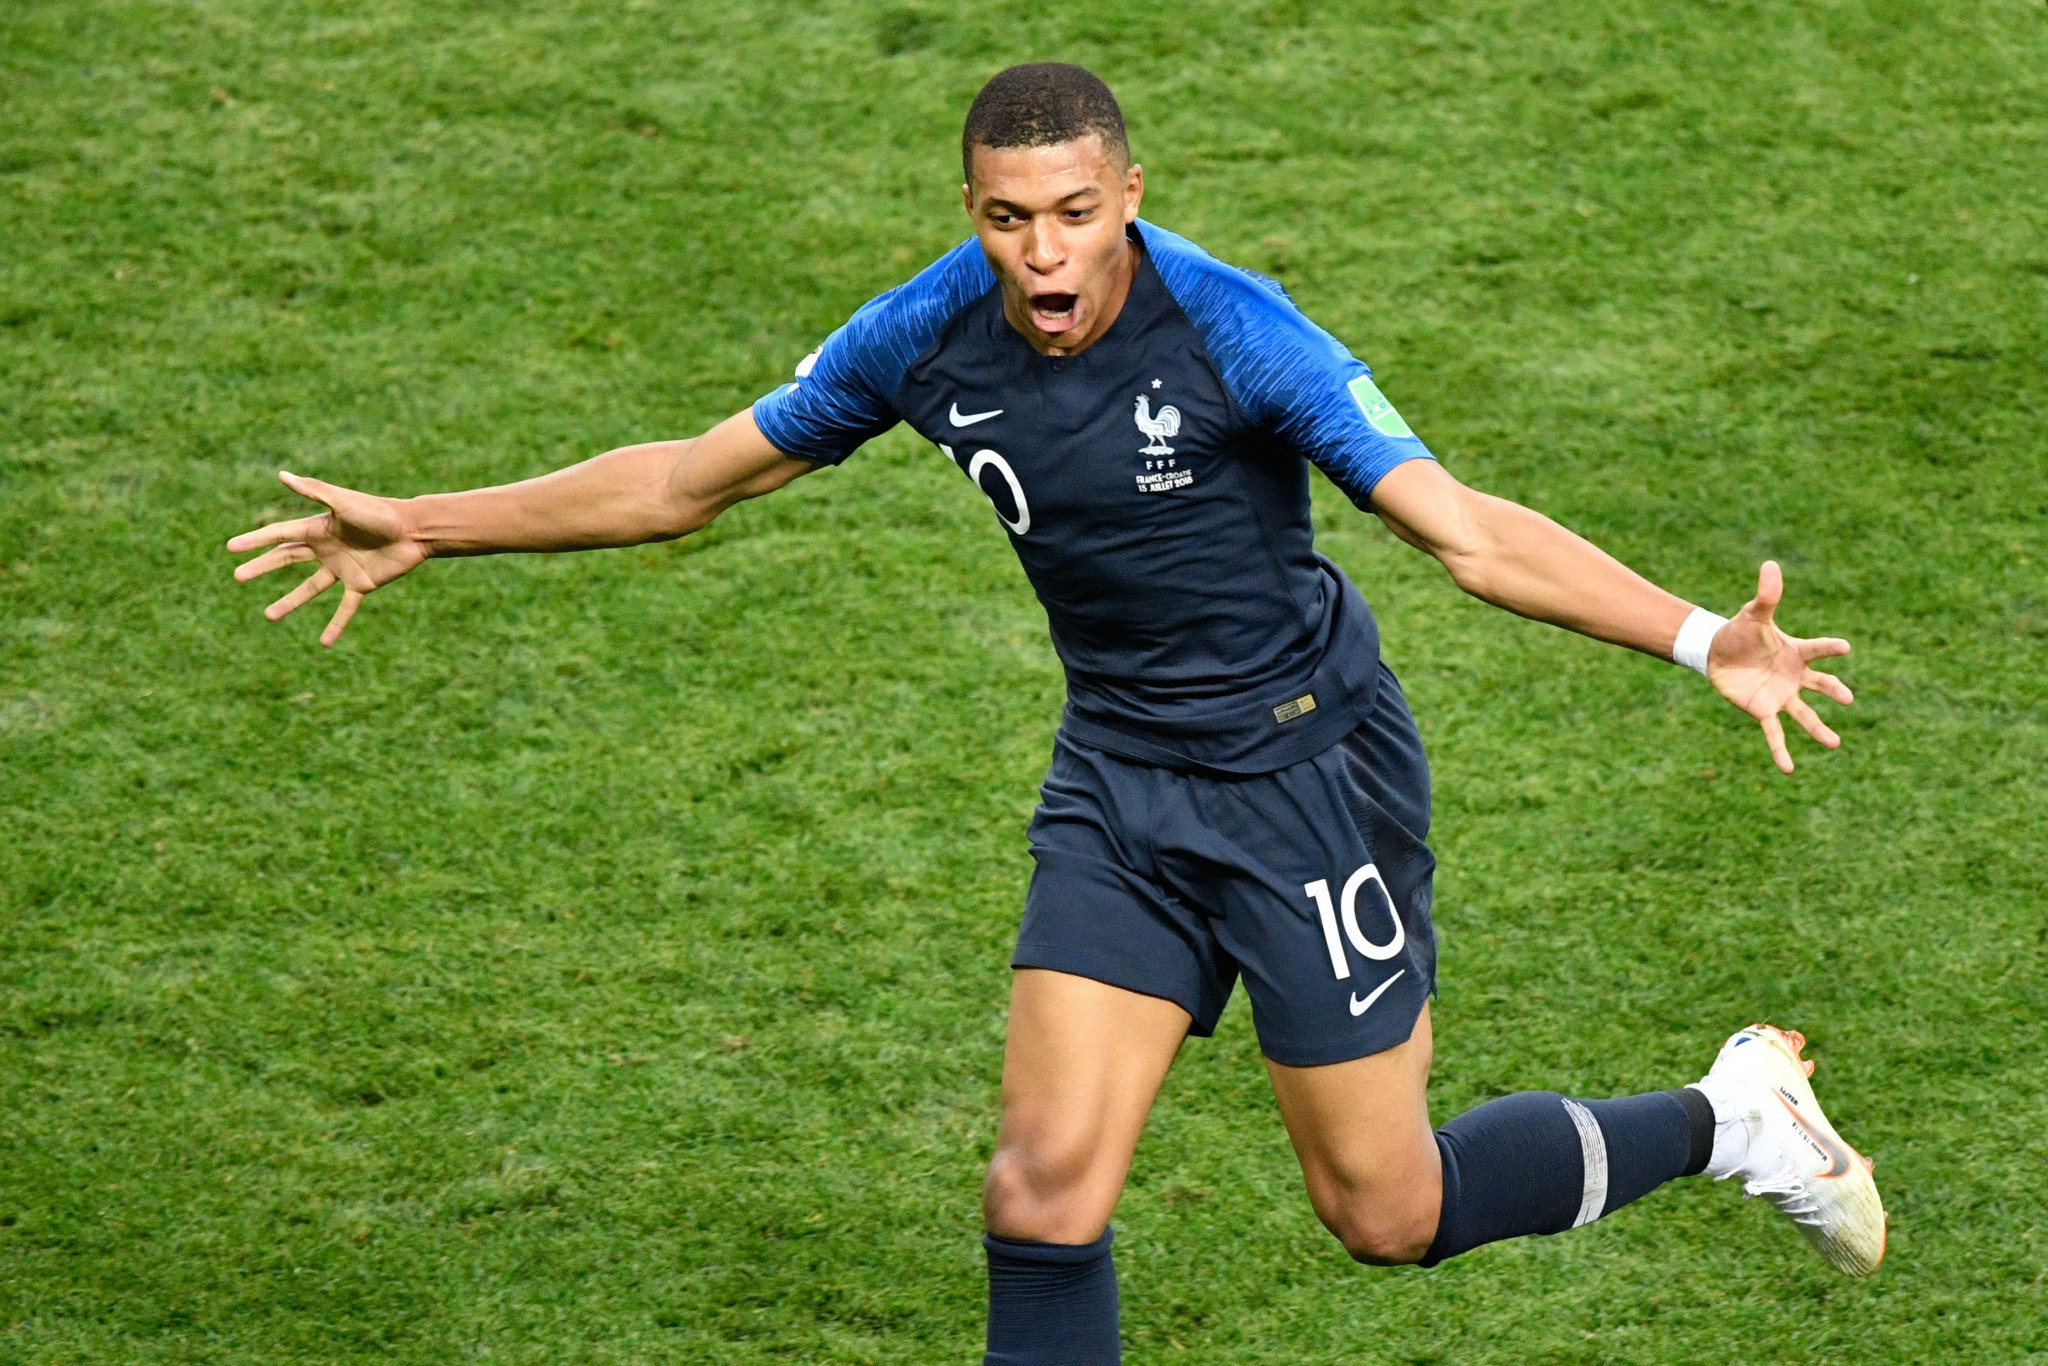 Kylian Mbappé, who played a key role in France winning the 2018 FIFA World Cup, is one of six nominees for sportsman of the year ©Getty Images